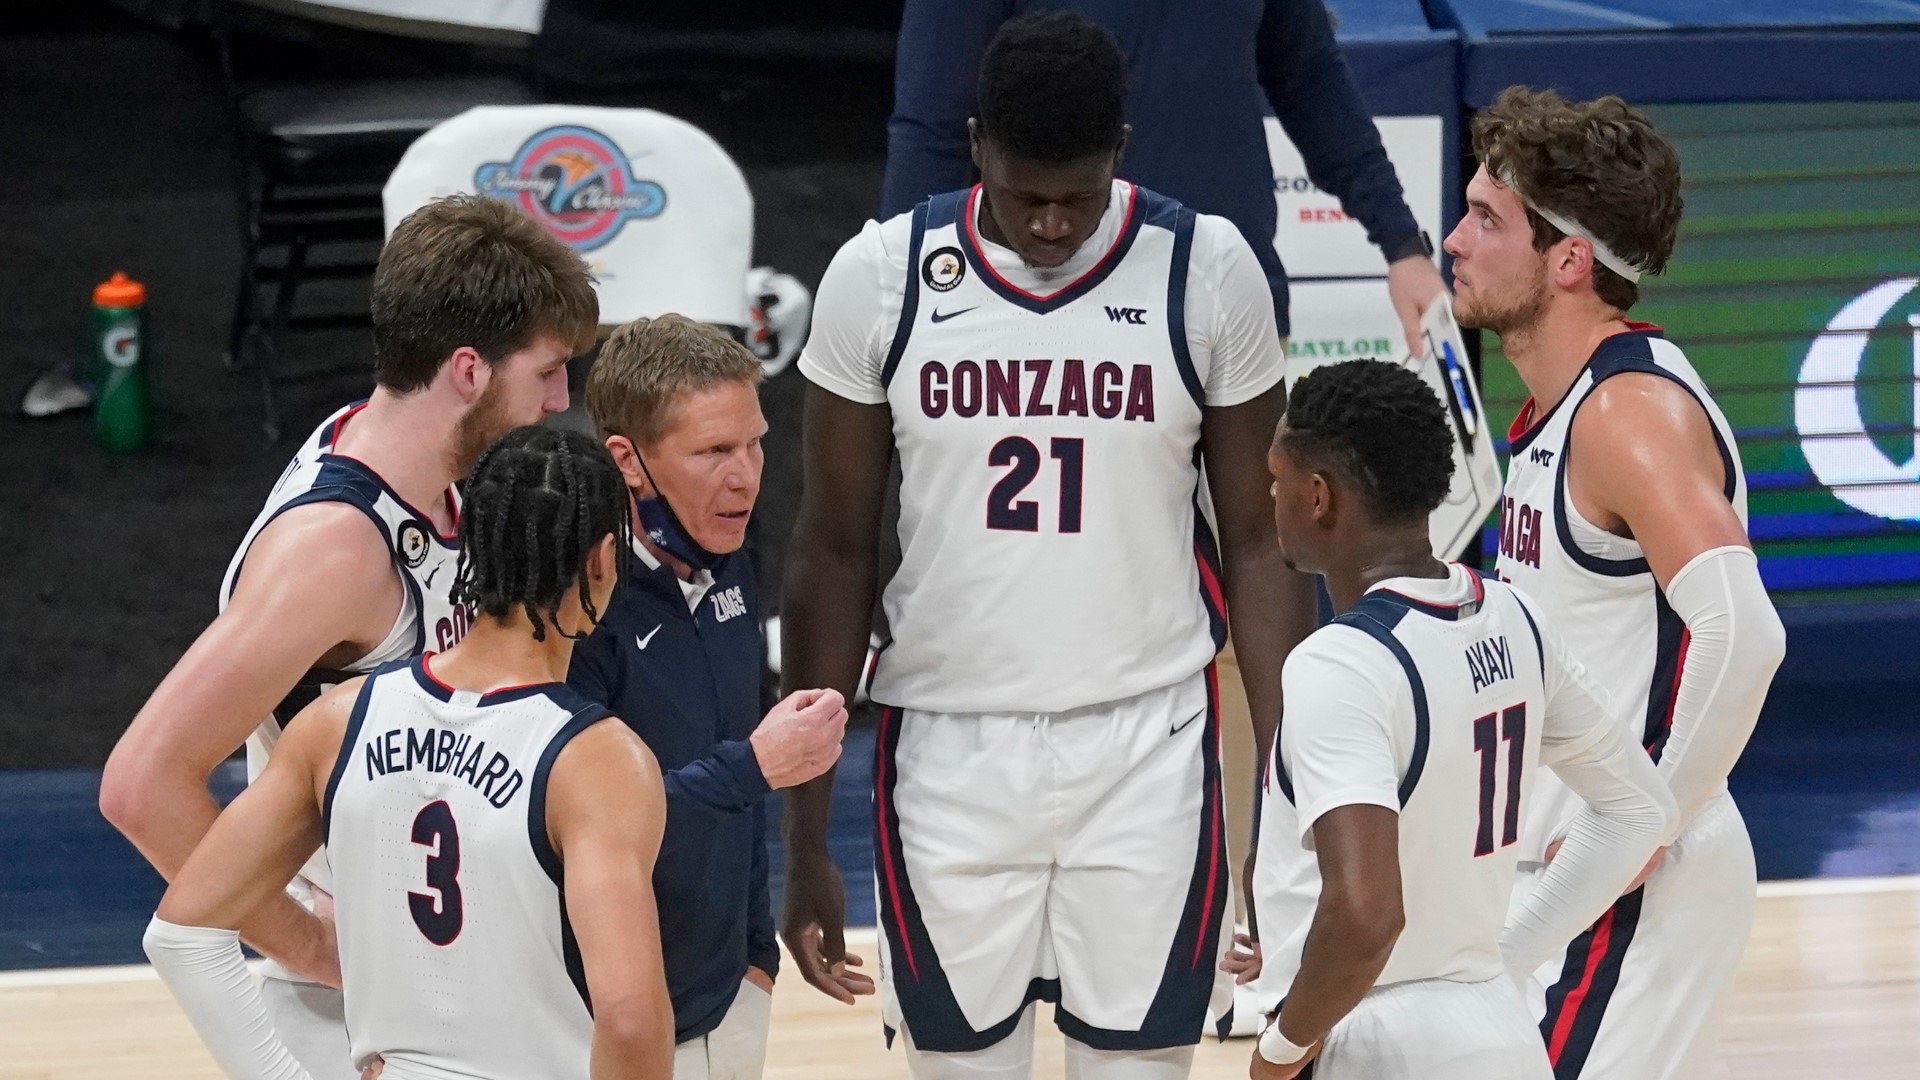 Yes, the Gonzaga men are ranked #1, but almost all of our local teams are stepping up their game.